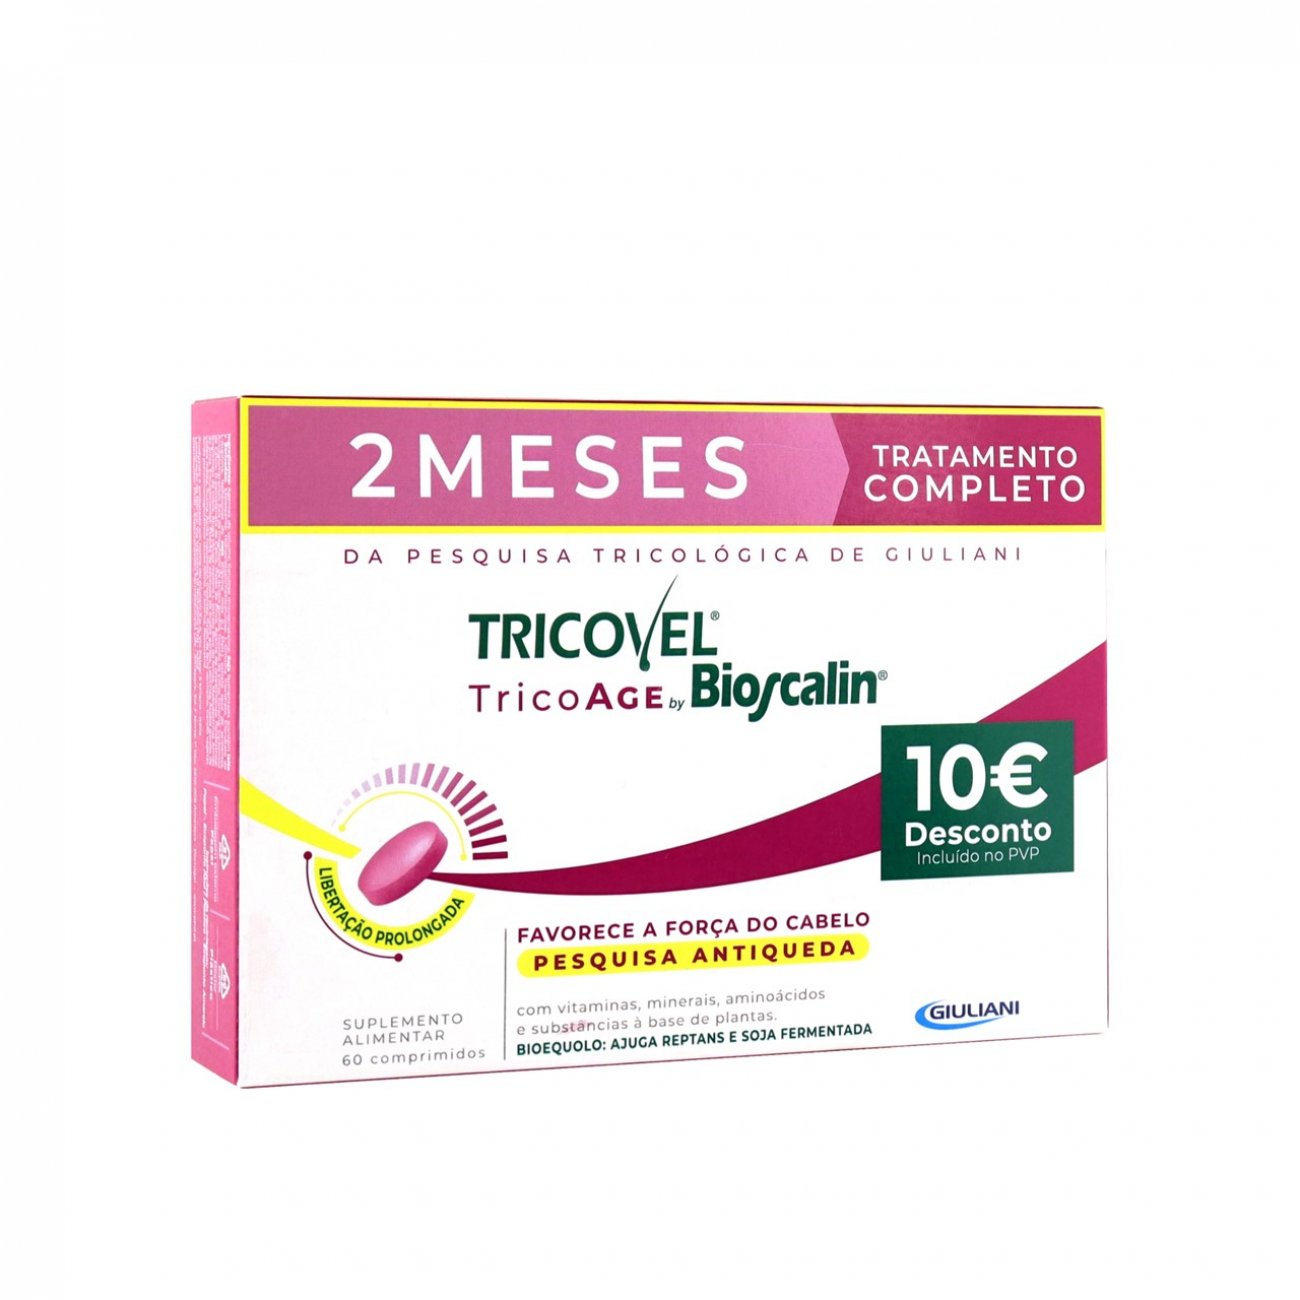 PROMOTIONAL PACK: Tricovel TricoAge Hair Strengthening Tablets x60